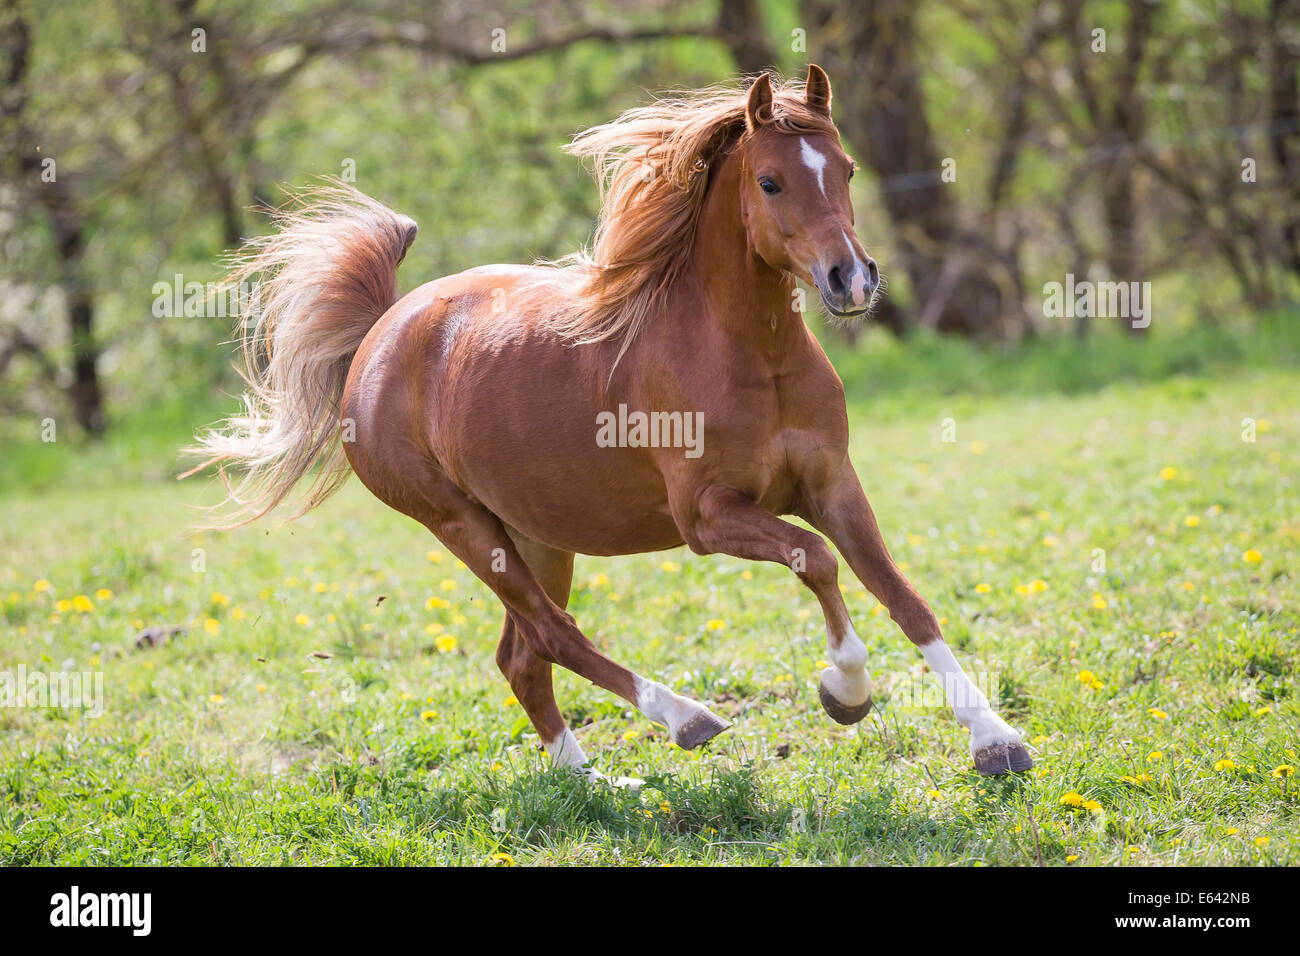 Welsh Pony (Section B). Chestnut mare galloping on a pasture in spring. Germany Stock Photo